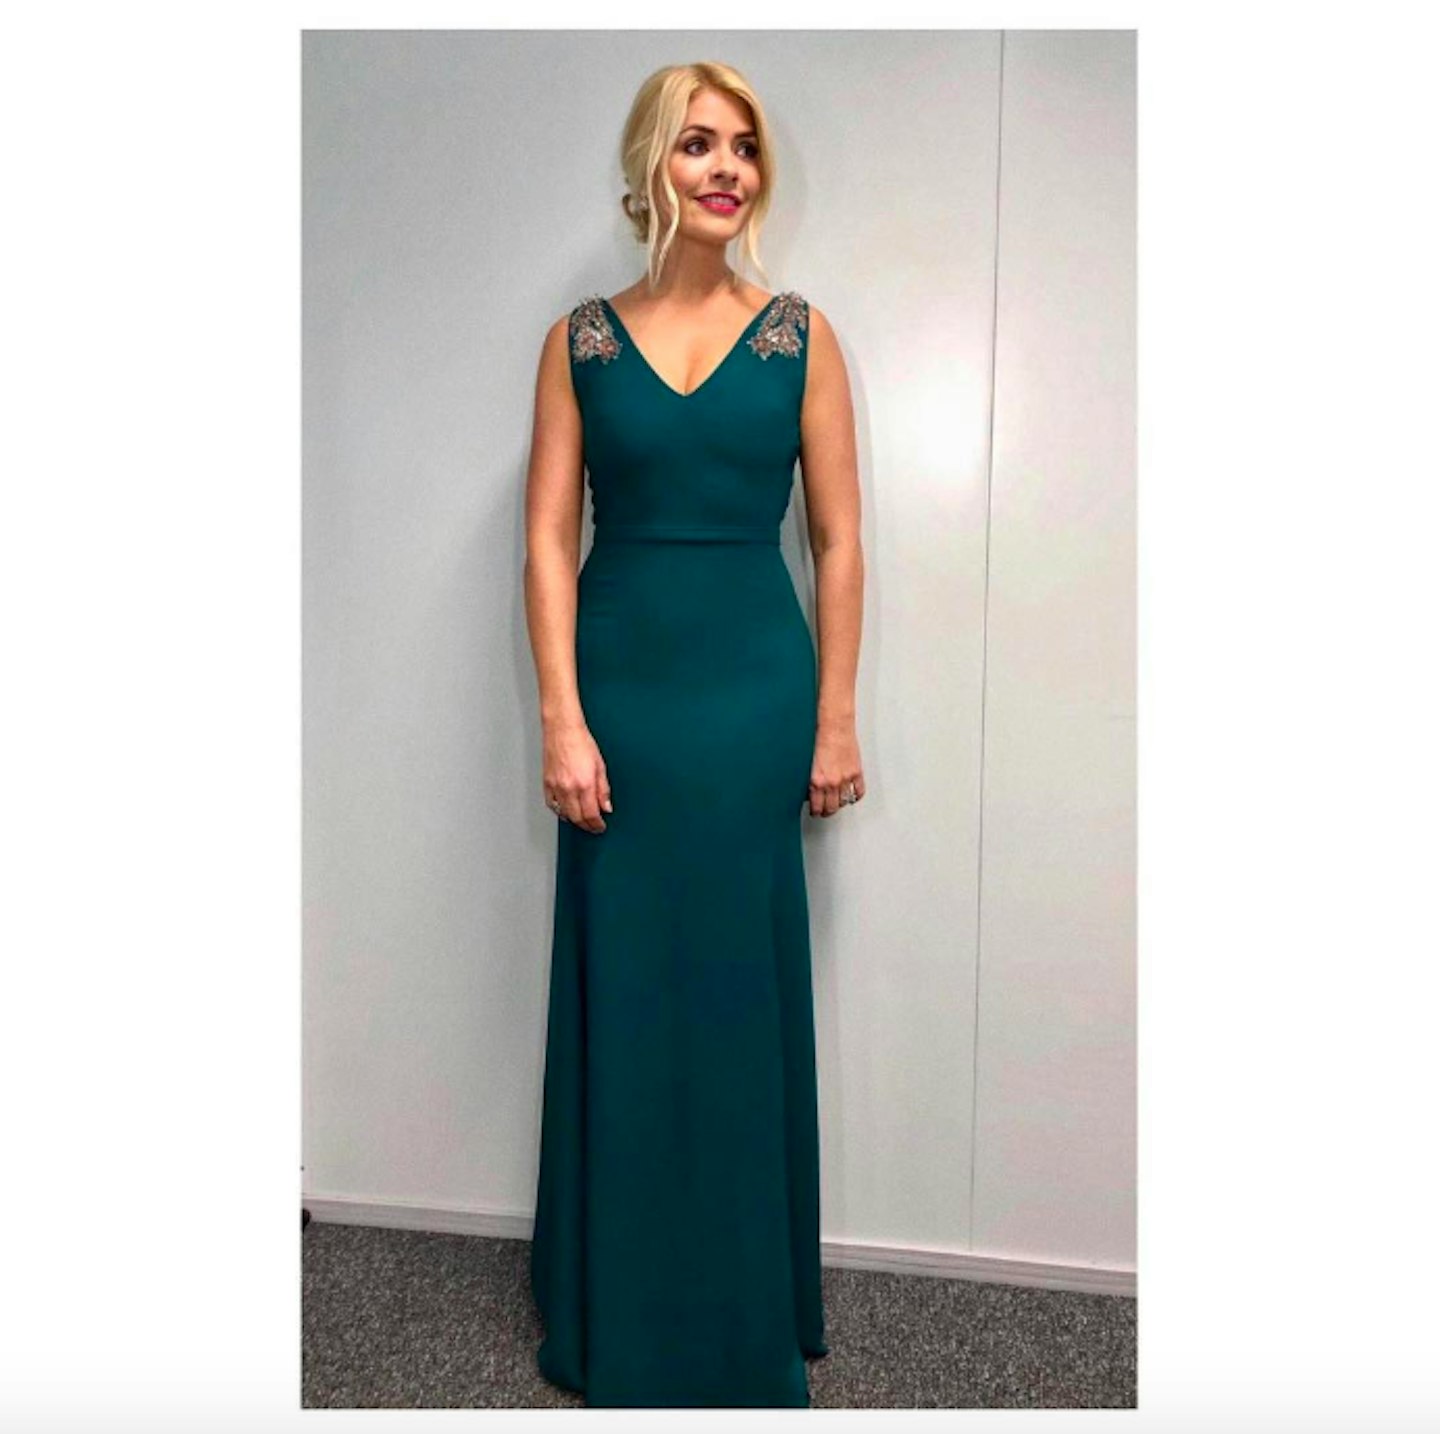 holly willoughby dancing on ice outfit week 7 2019